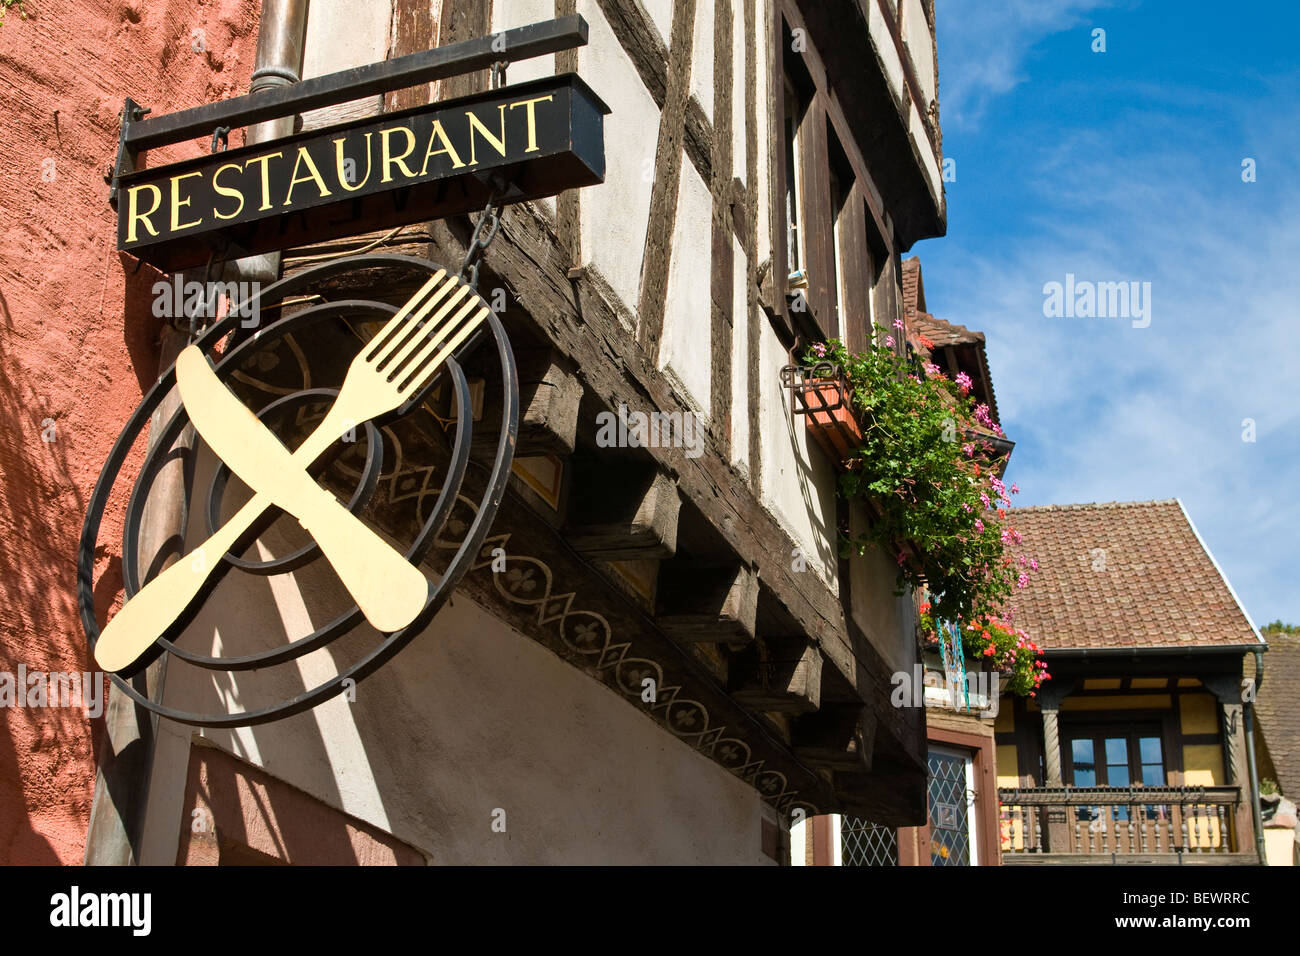 ALSACE Restaurant sign of crossed knife and fork with typical sunny floral Alsace houses in background France Stock Photo